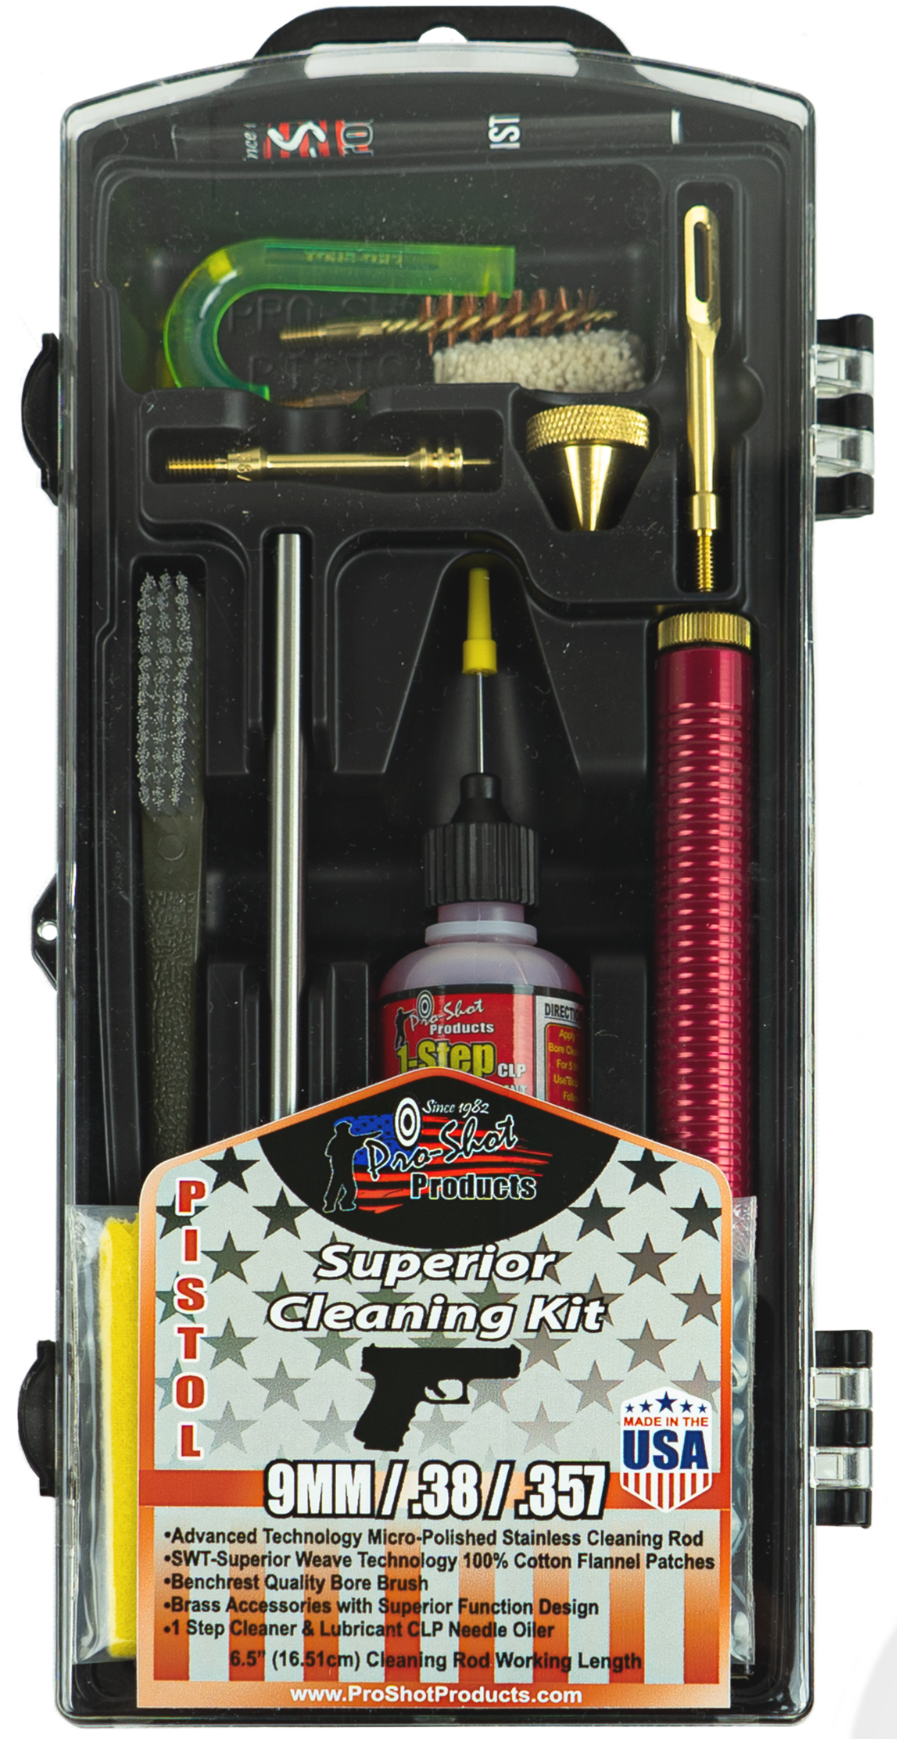 Superior Cleaning Kit .38/.357 - 9MM